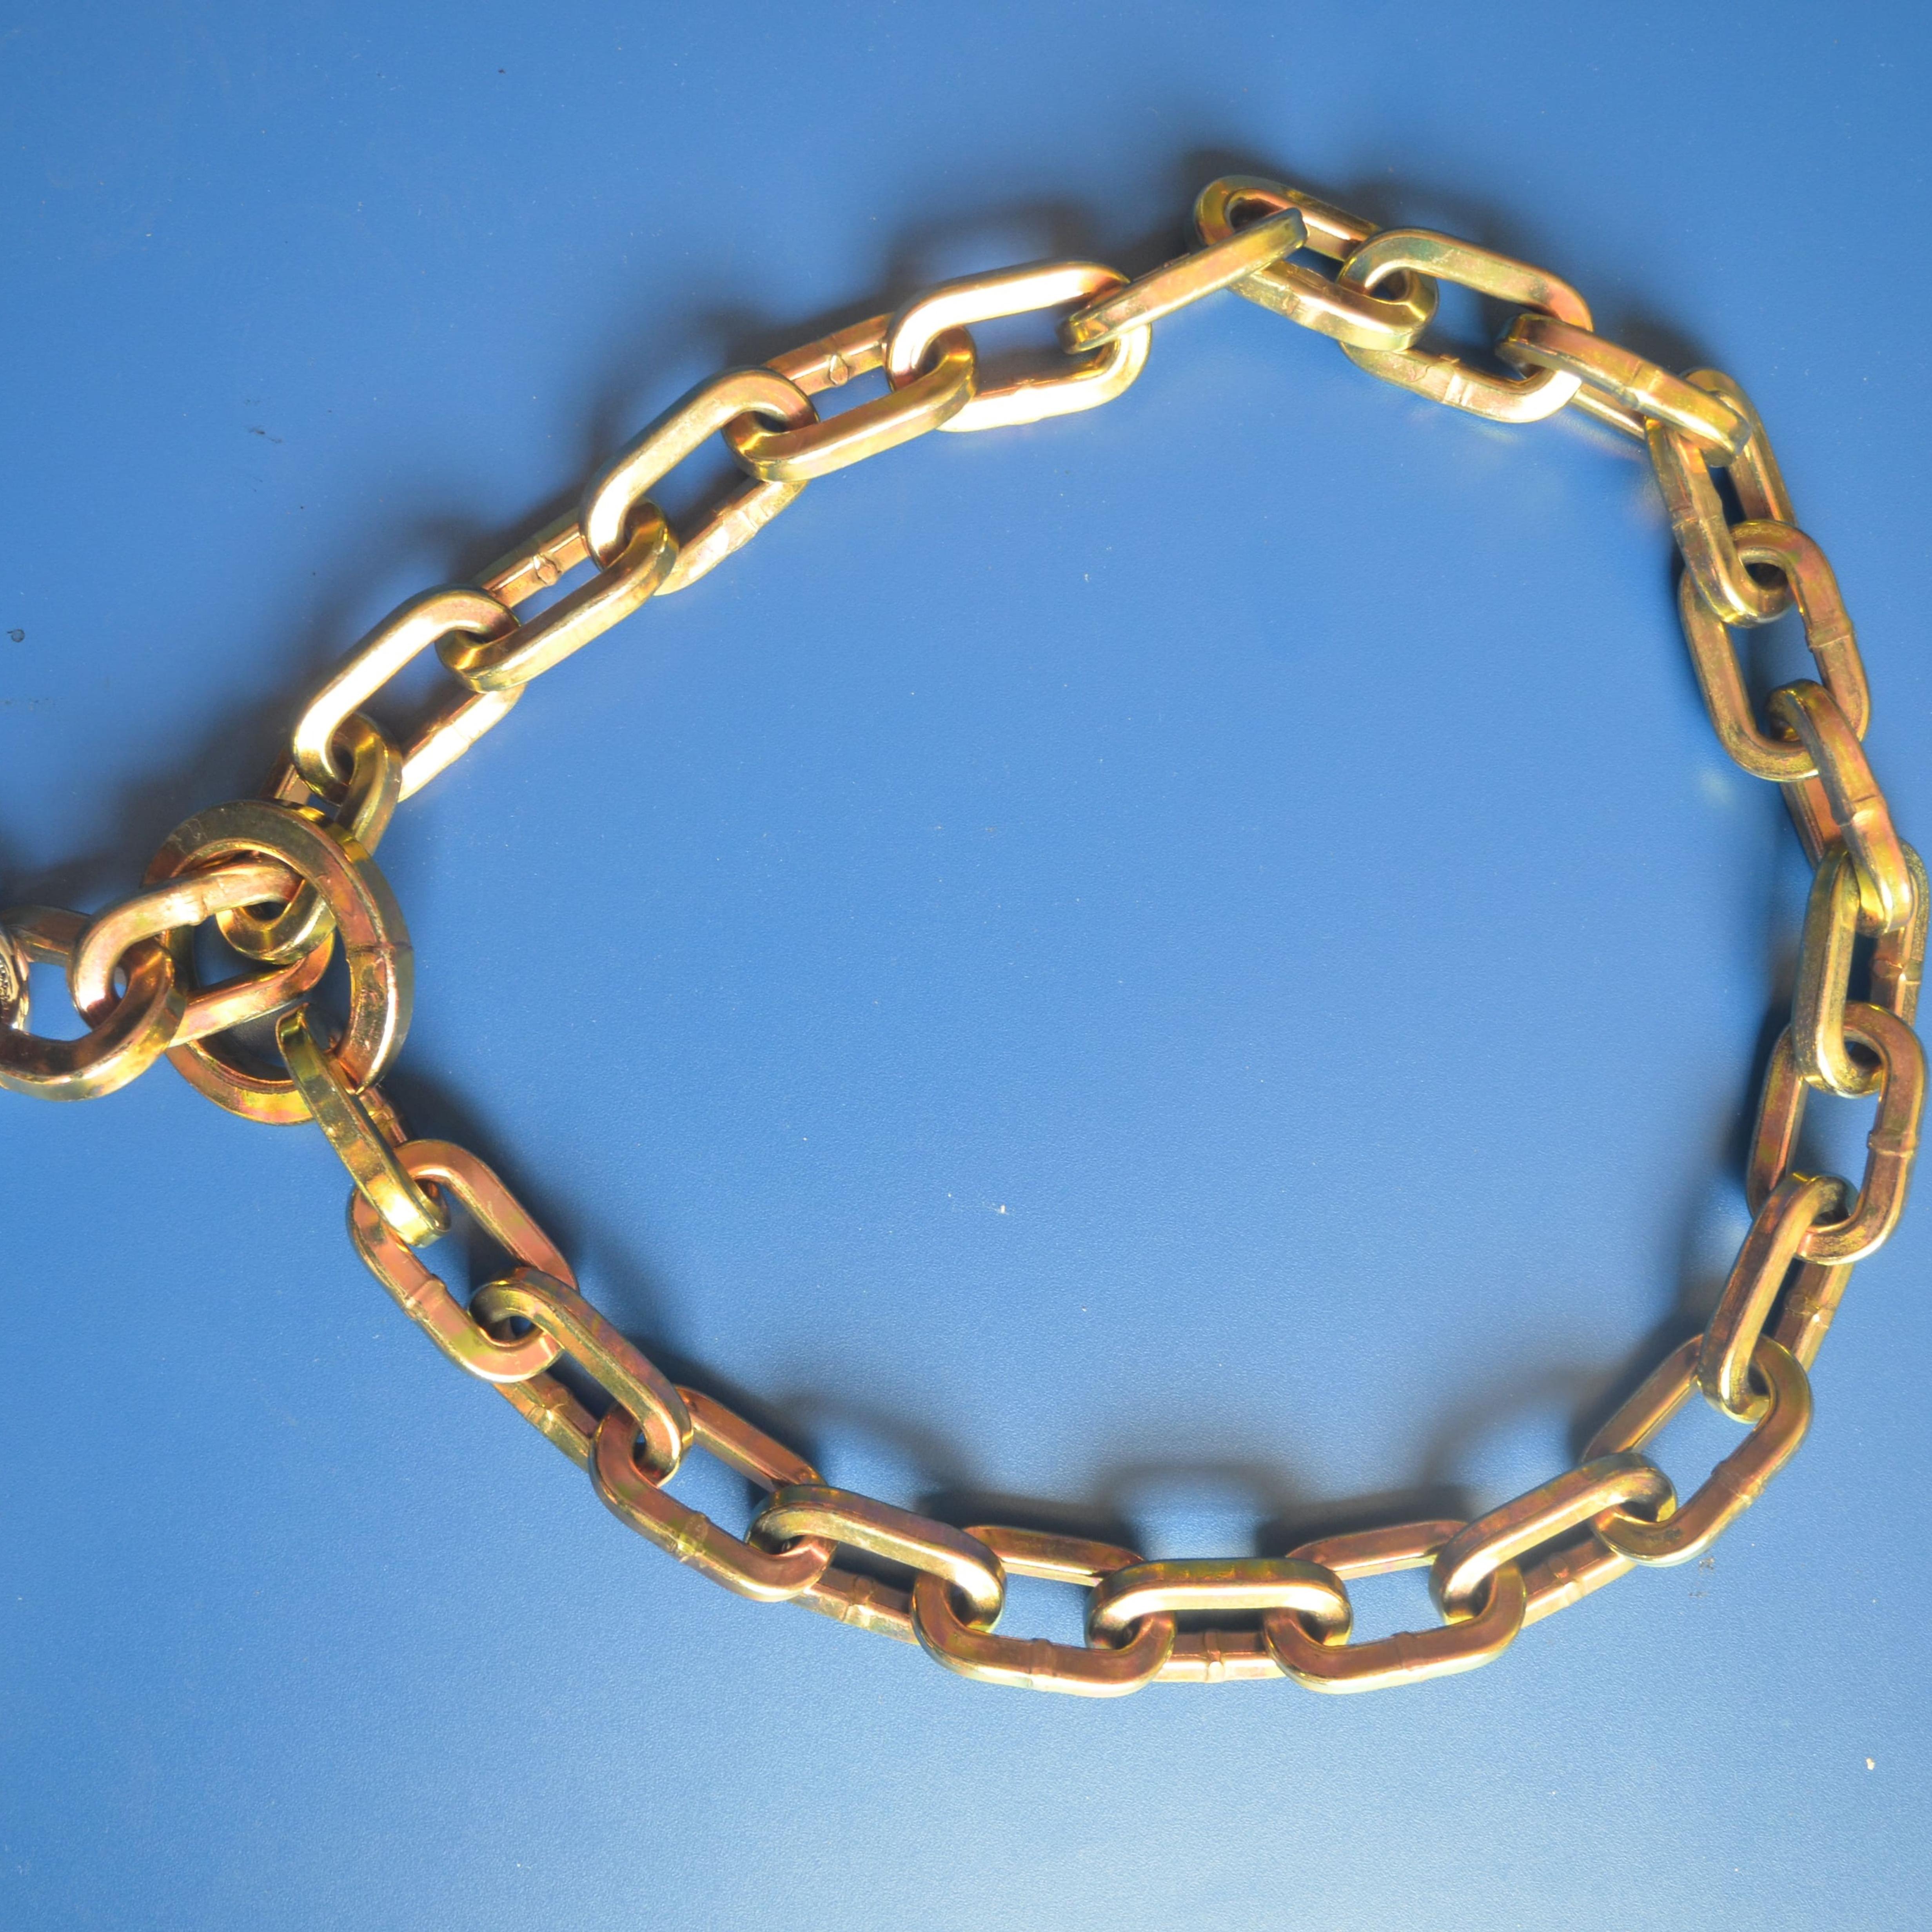 8mm Square Shape Lock Chain with a Ring